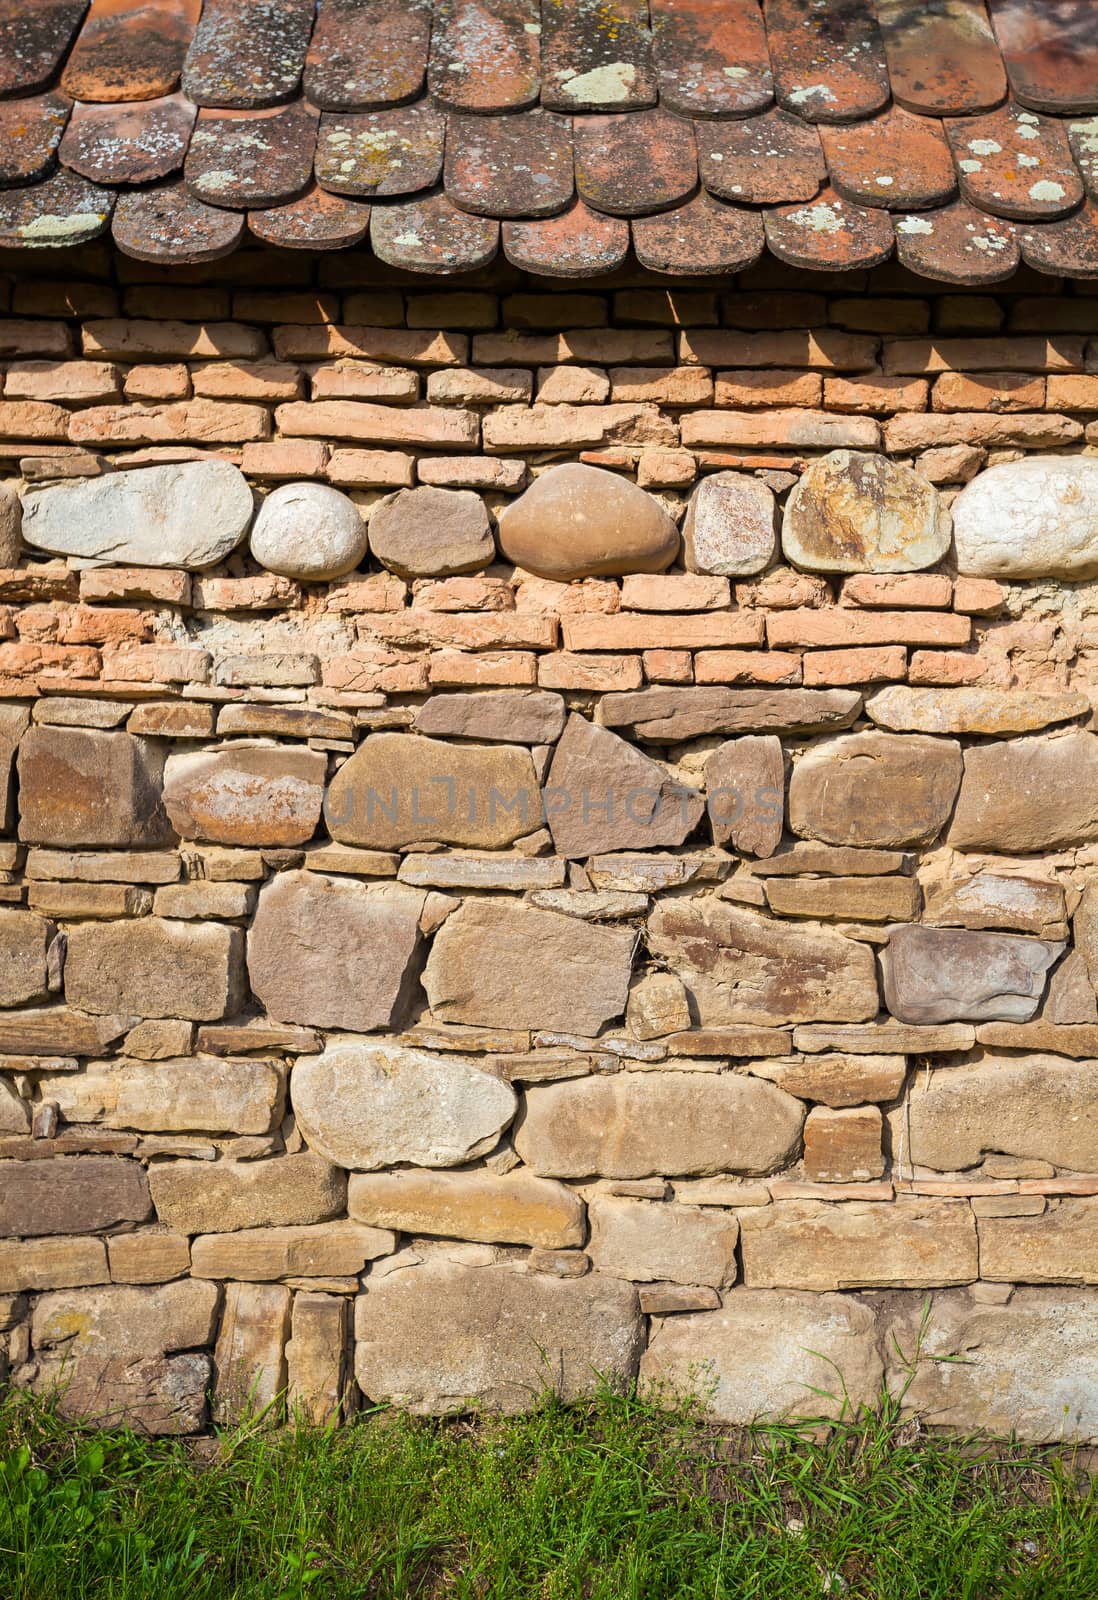 Rustic wall with layers of different comstruction materials - sandstones, bricks, river stones and roof tiles